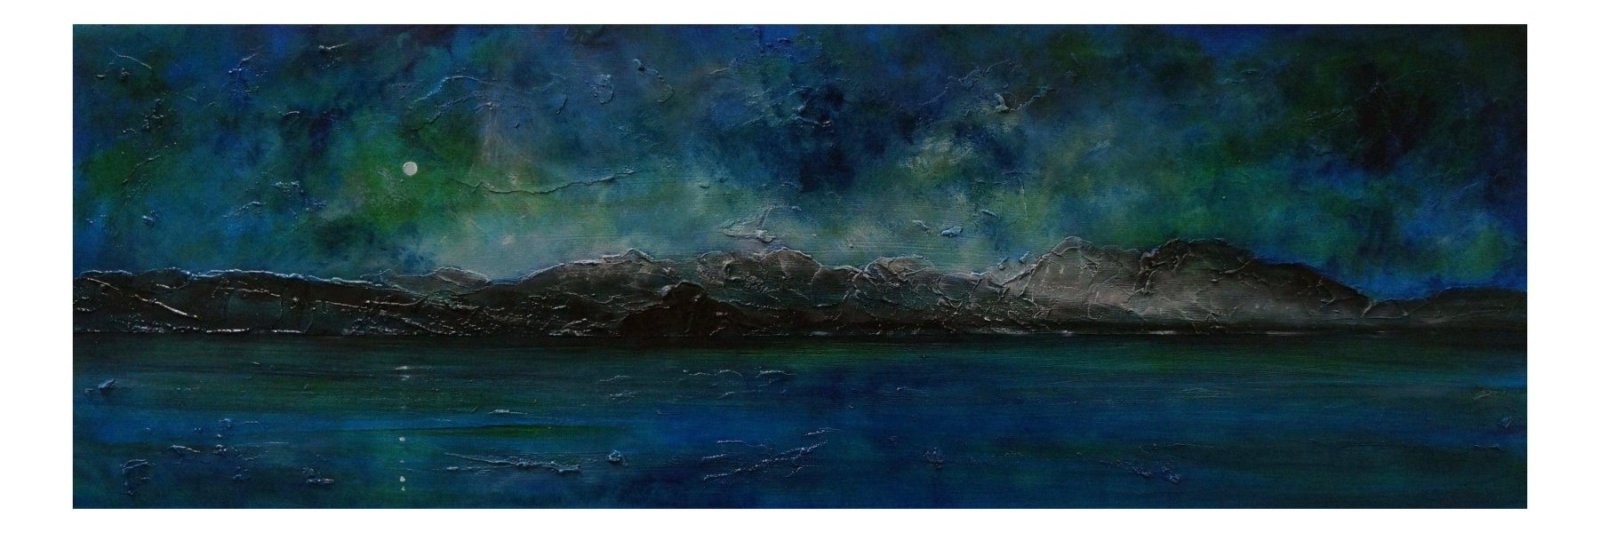 A Prussian Arran Night-Panoramic Prints-Arran Art Gallery-Paintings, Prints, Homeware, Art Gifts From Scotland By Scottish Artist Kevin Hunter